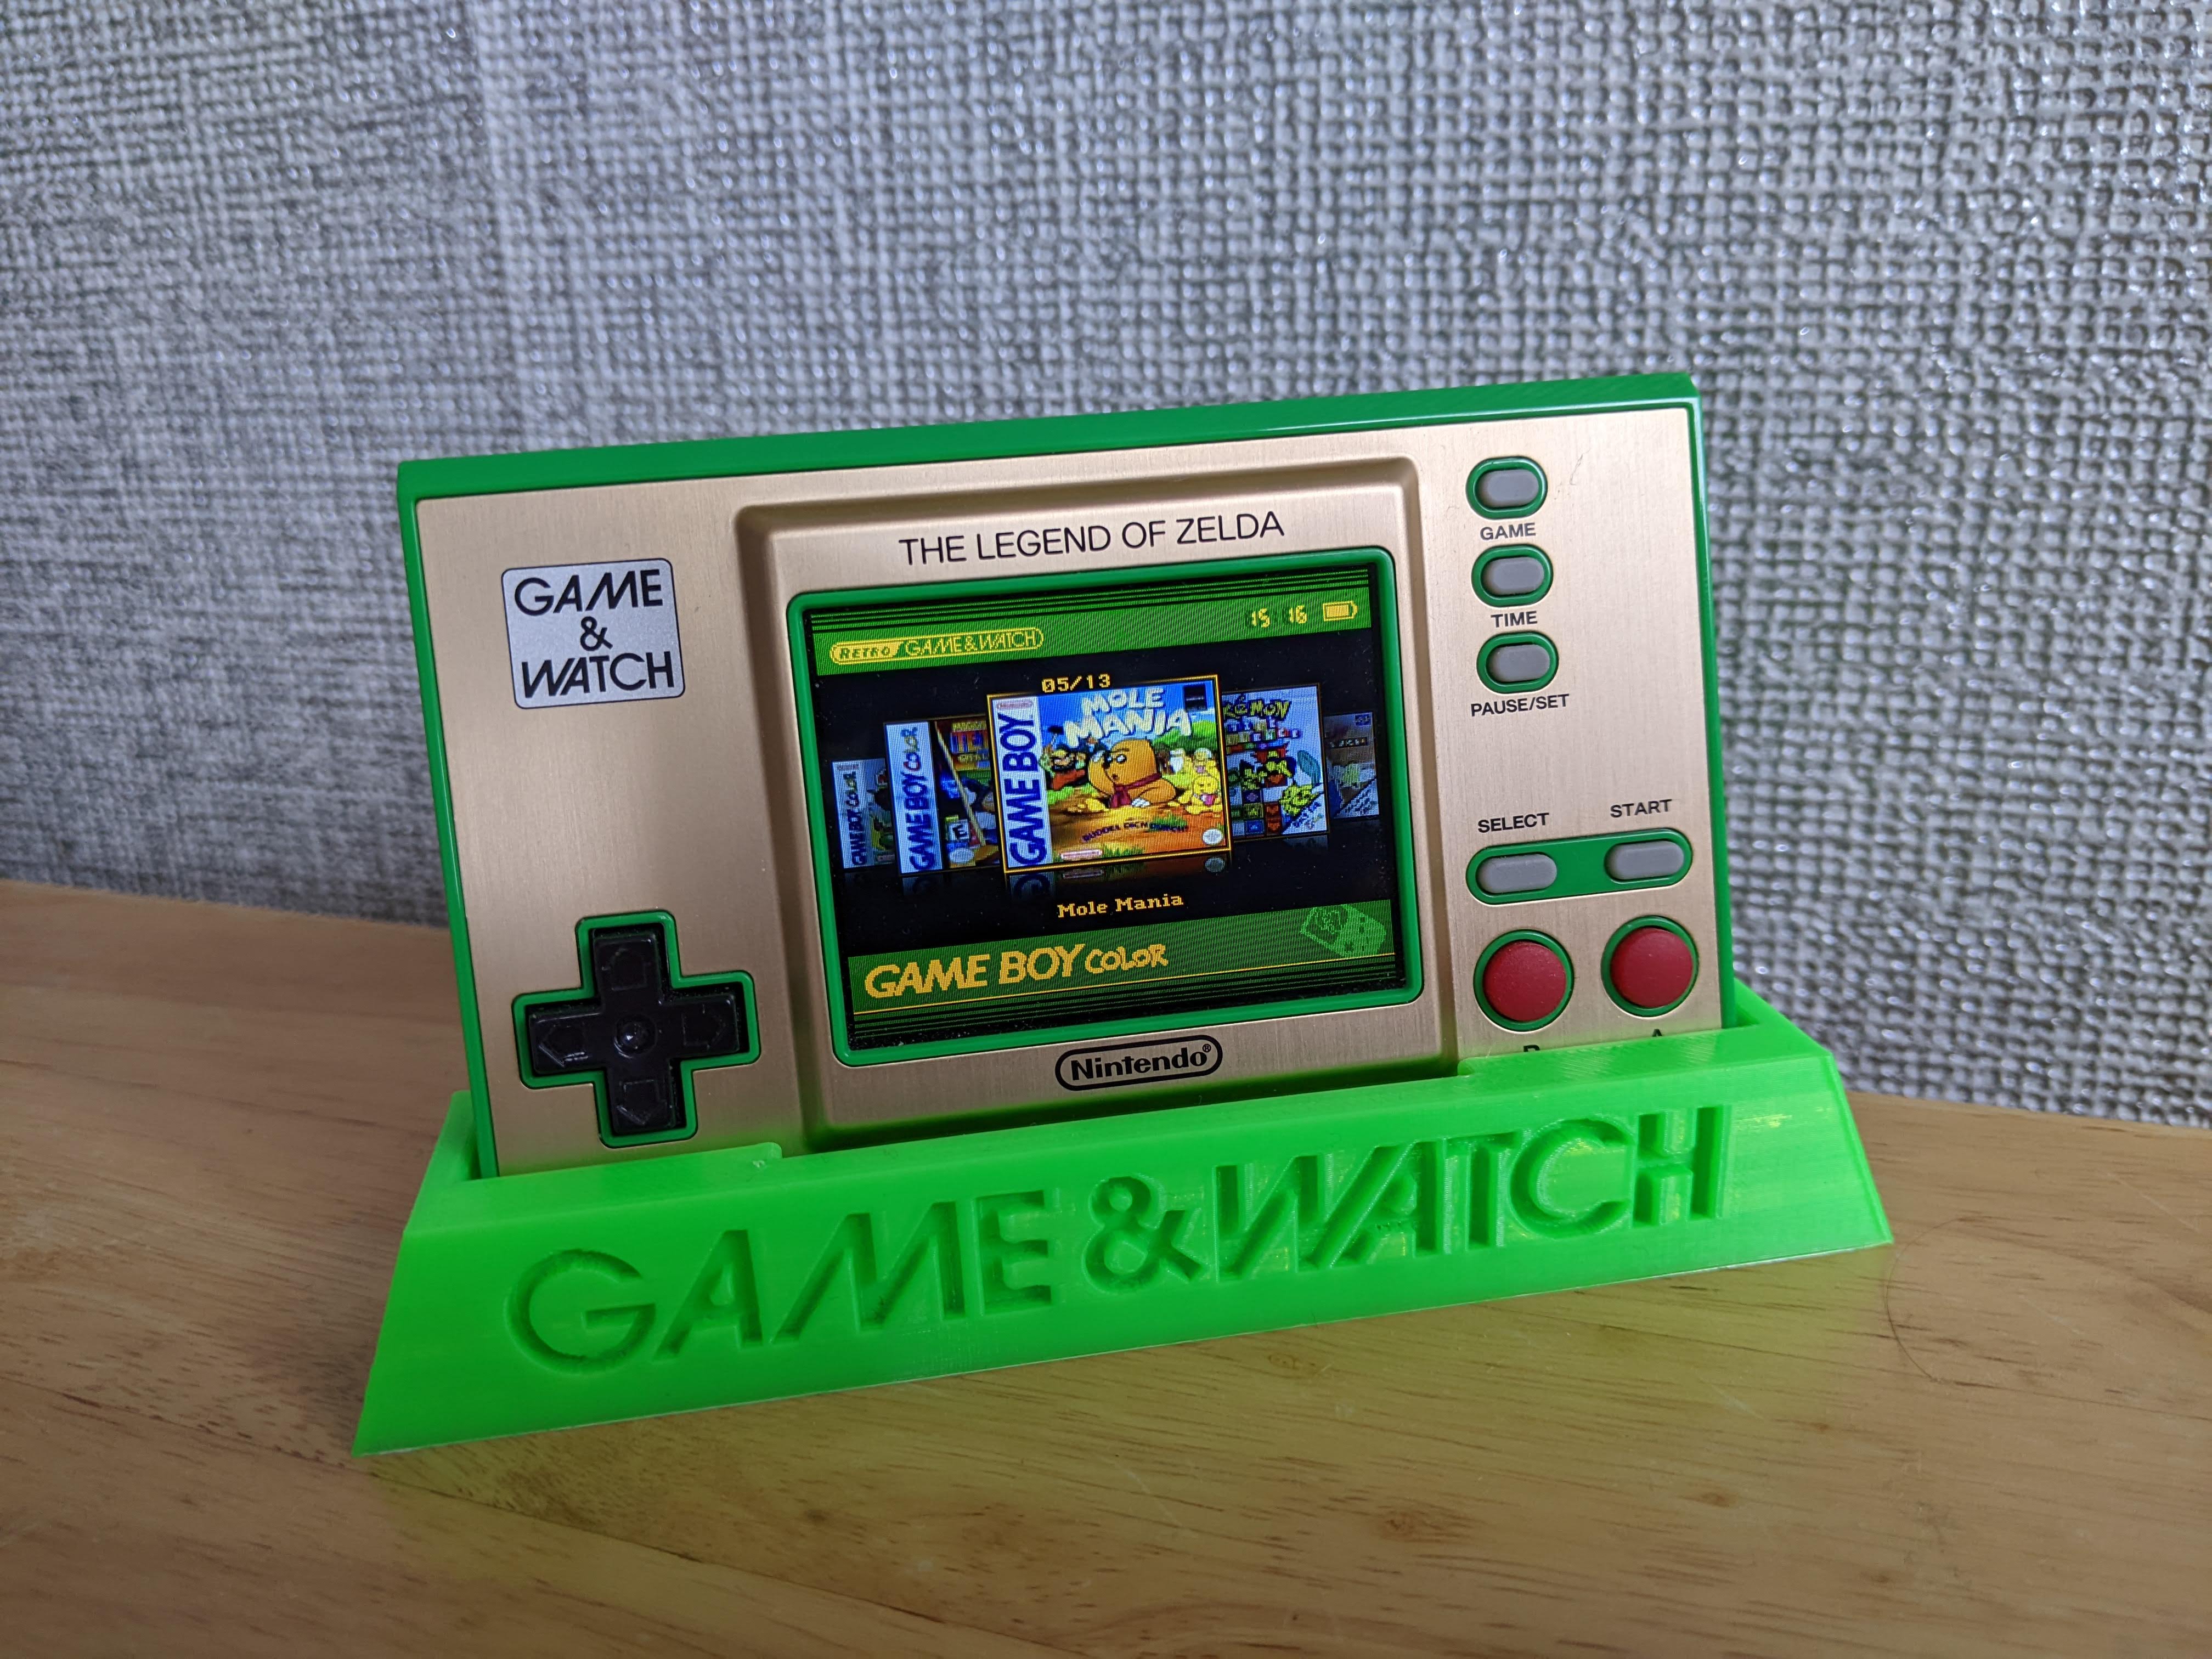 Game and Watch hacking RPI (Do not use this guide) –